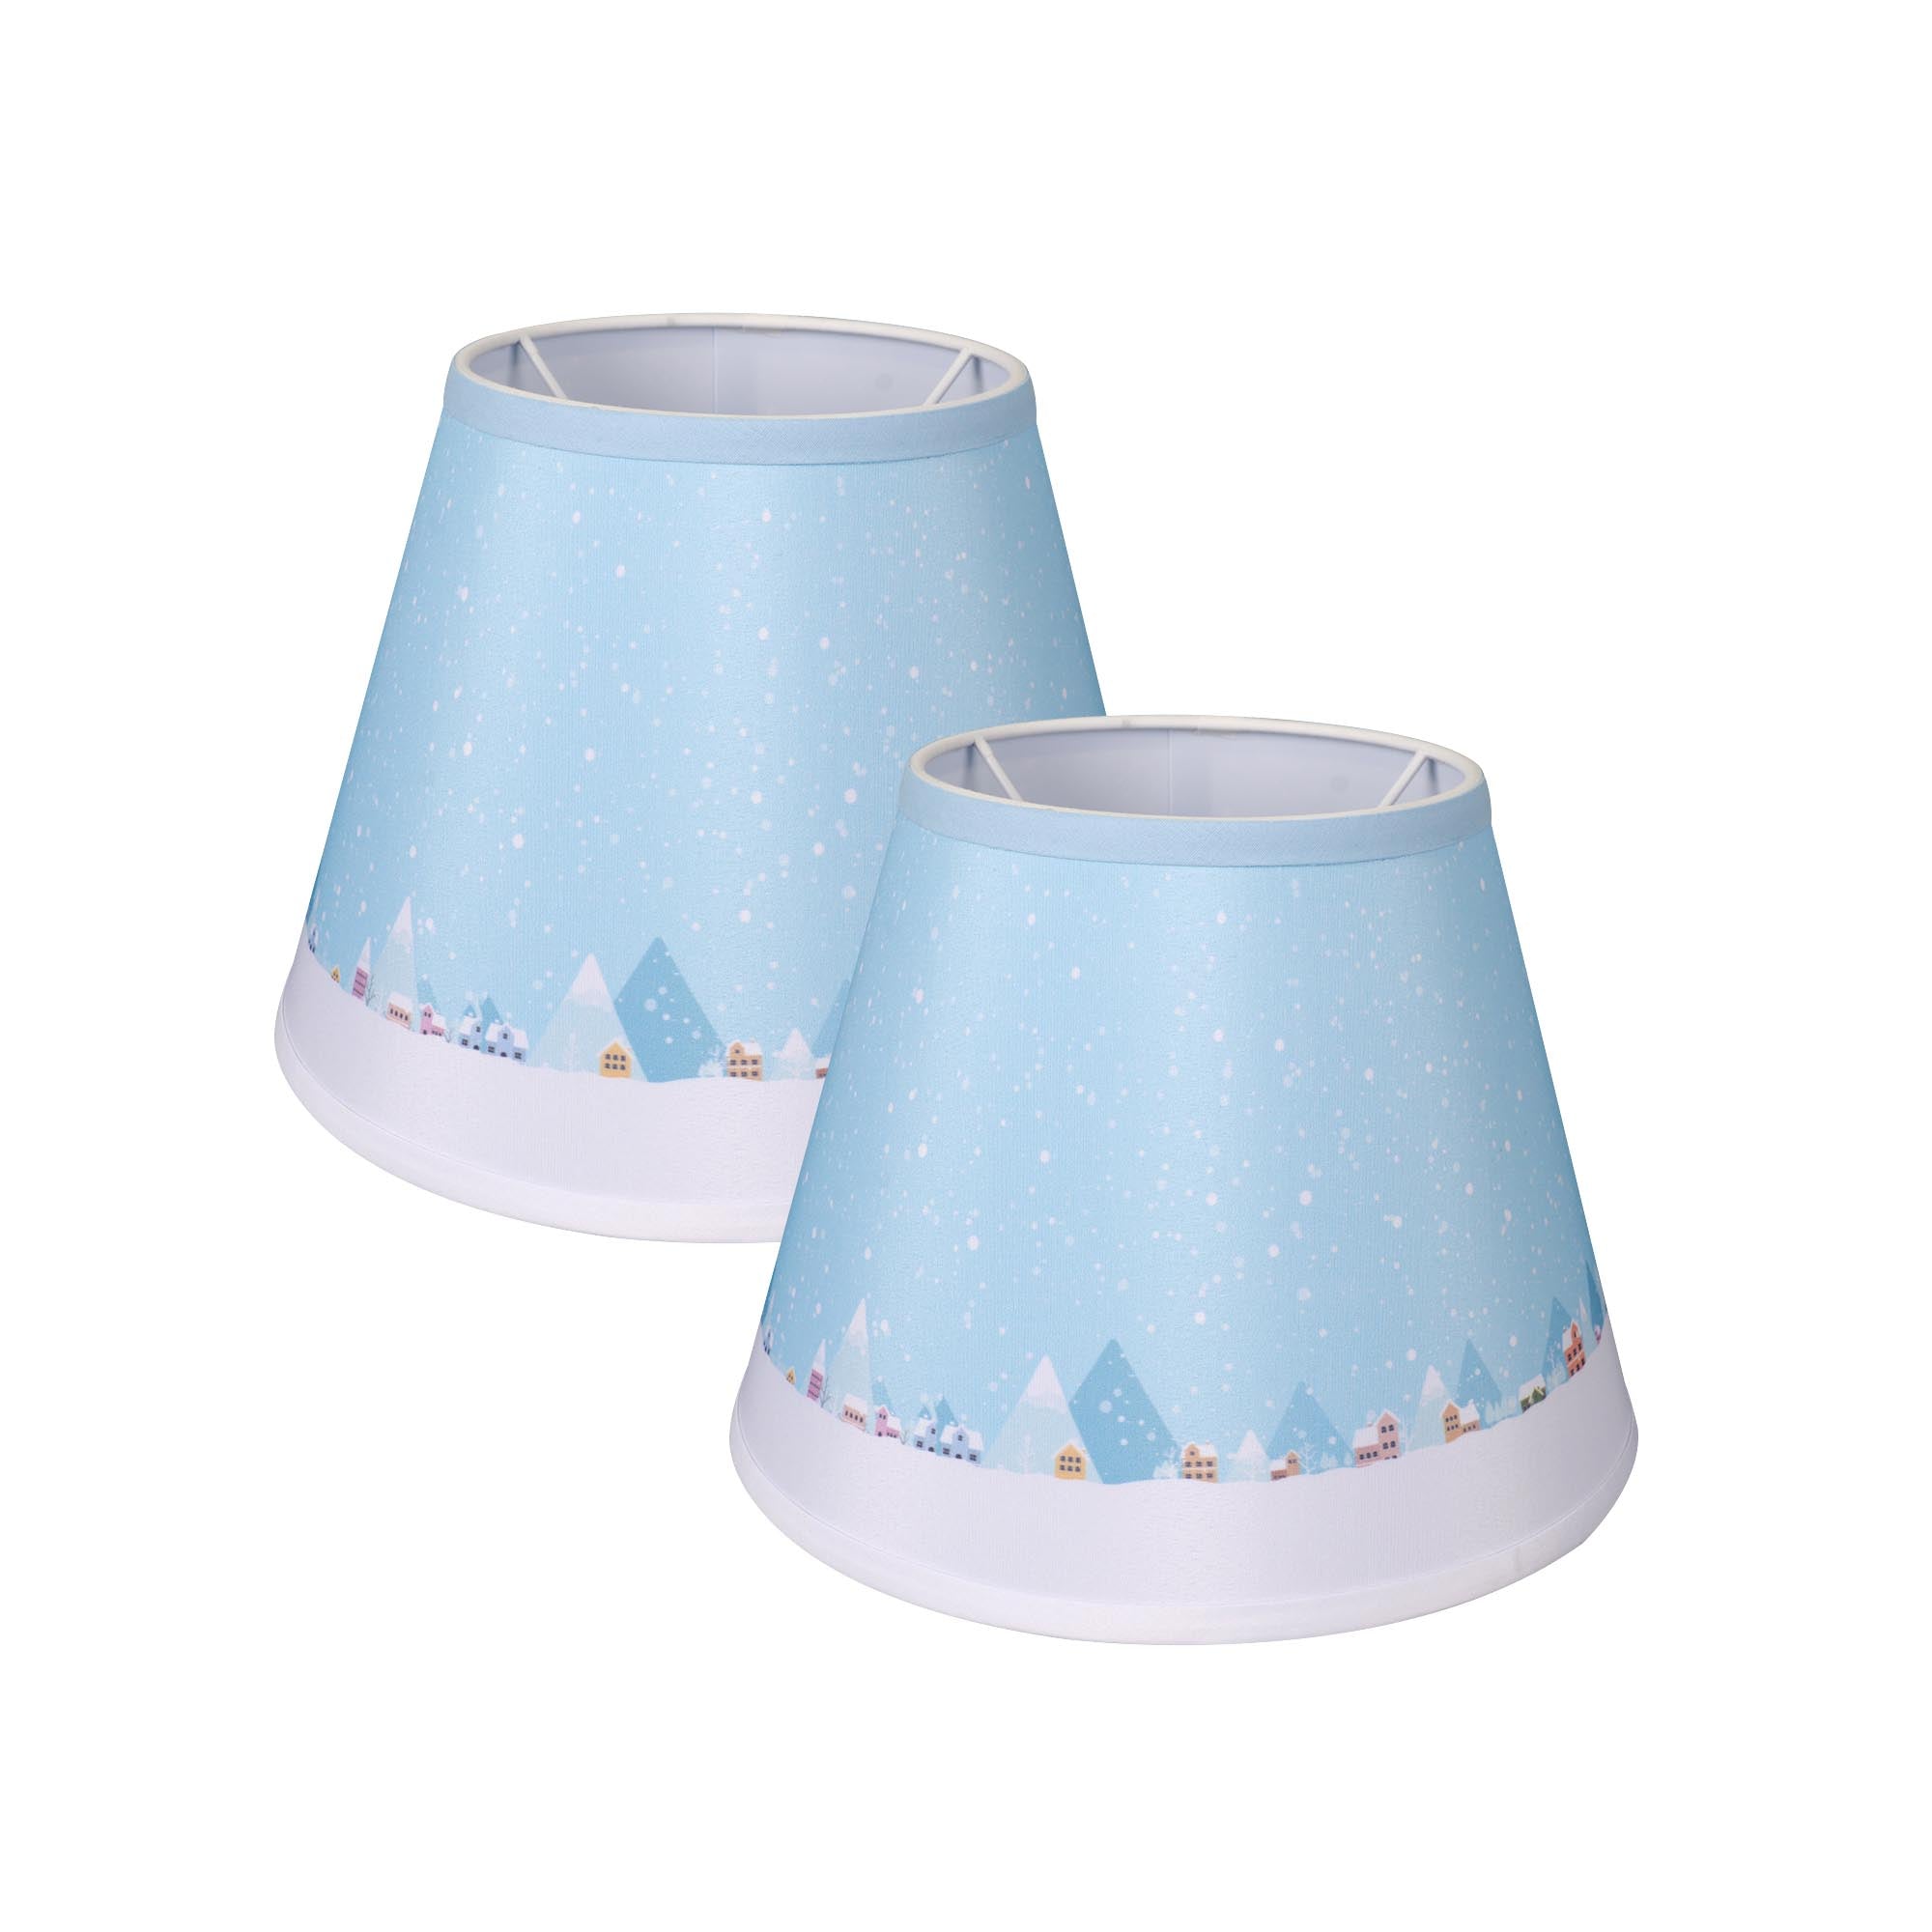 Carro Home Winter Collection Limited Edition Round Empire Shape Lamp Shade 6"x10"x7.5" – Snowy Village (Set of 2)